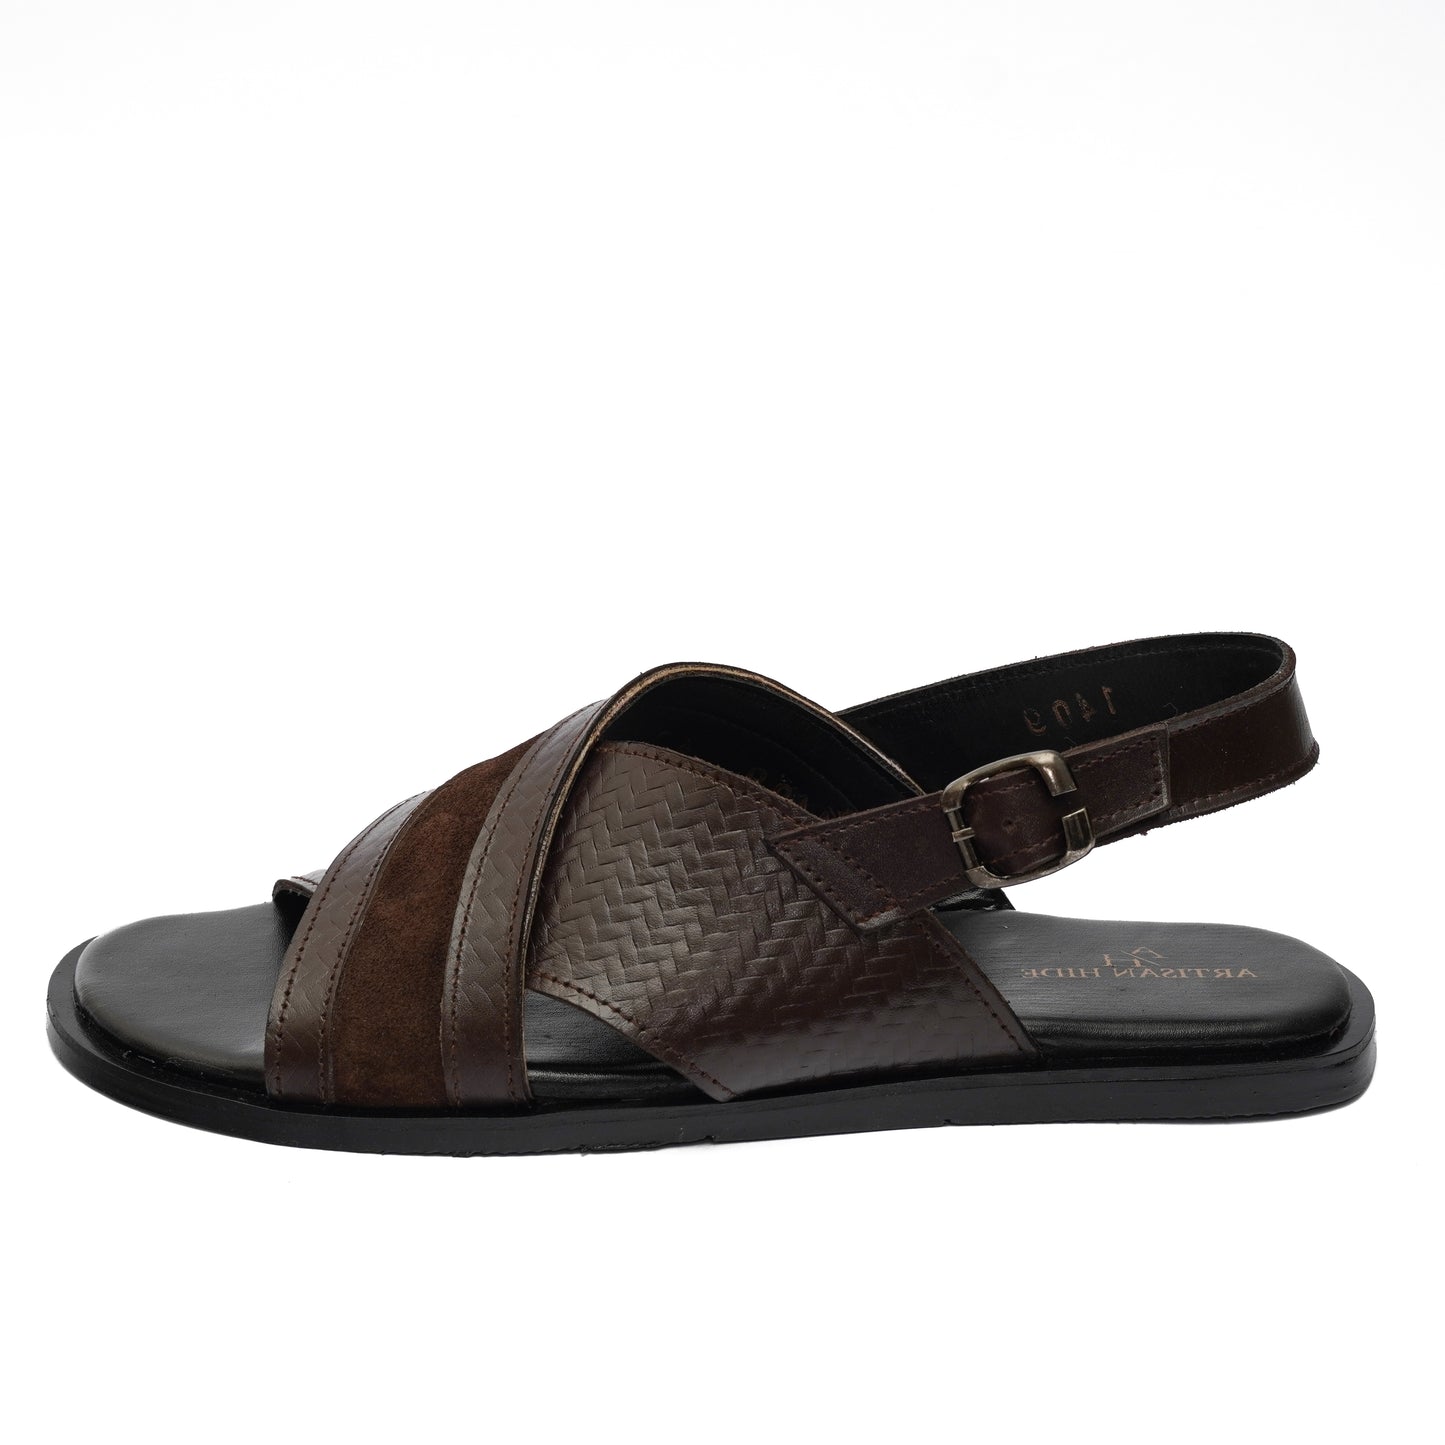 COFFEE BROWN SUEDE LEATHER SANDAL